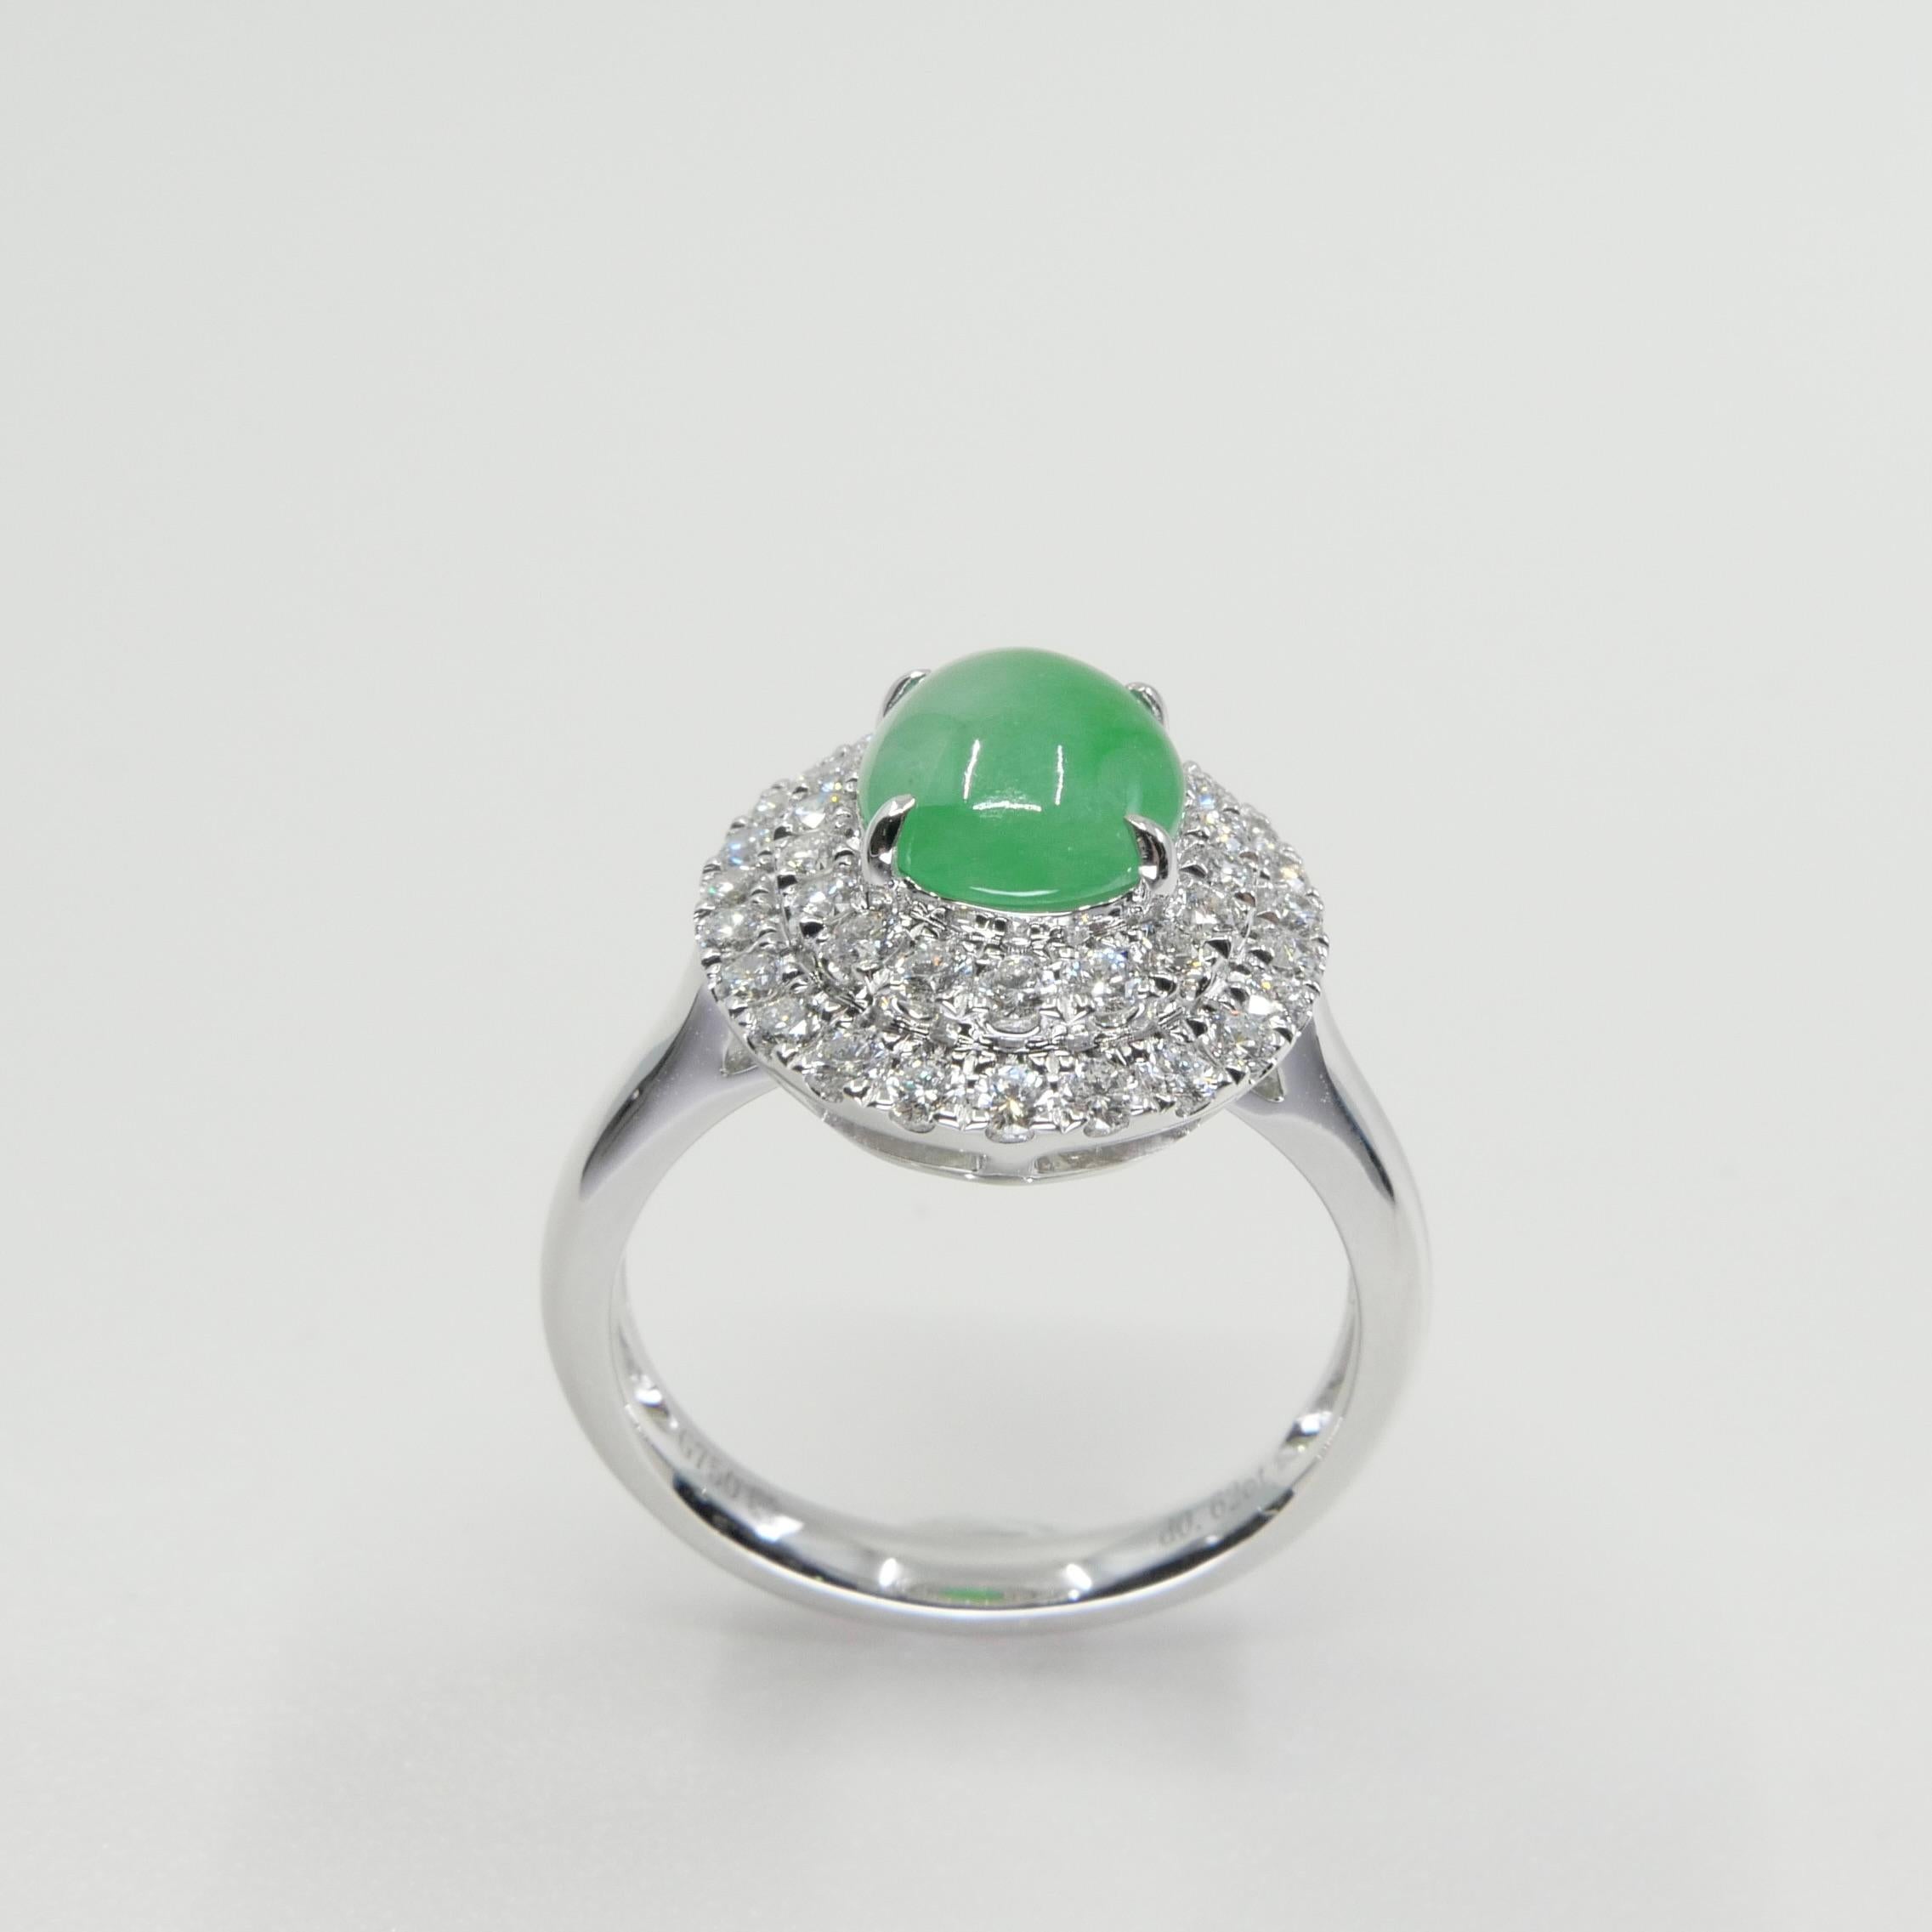 Certified 1.59 Carat Natural Jade & Diamond Cocktail Ring, Apple Green Color For Sale 6